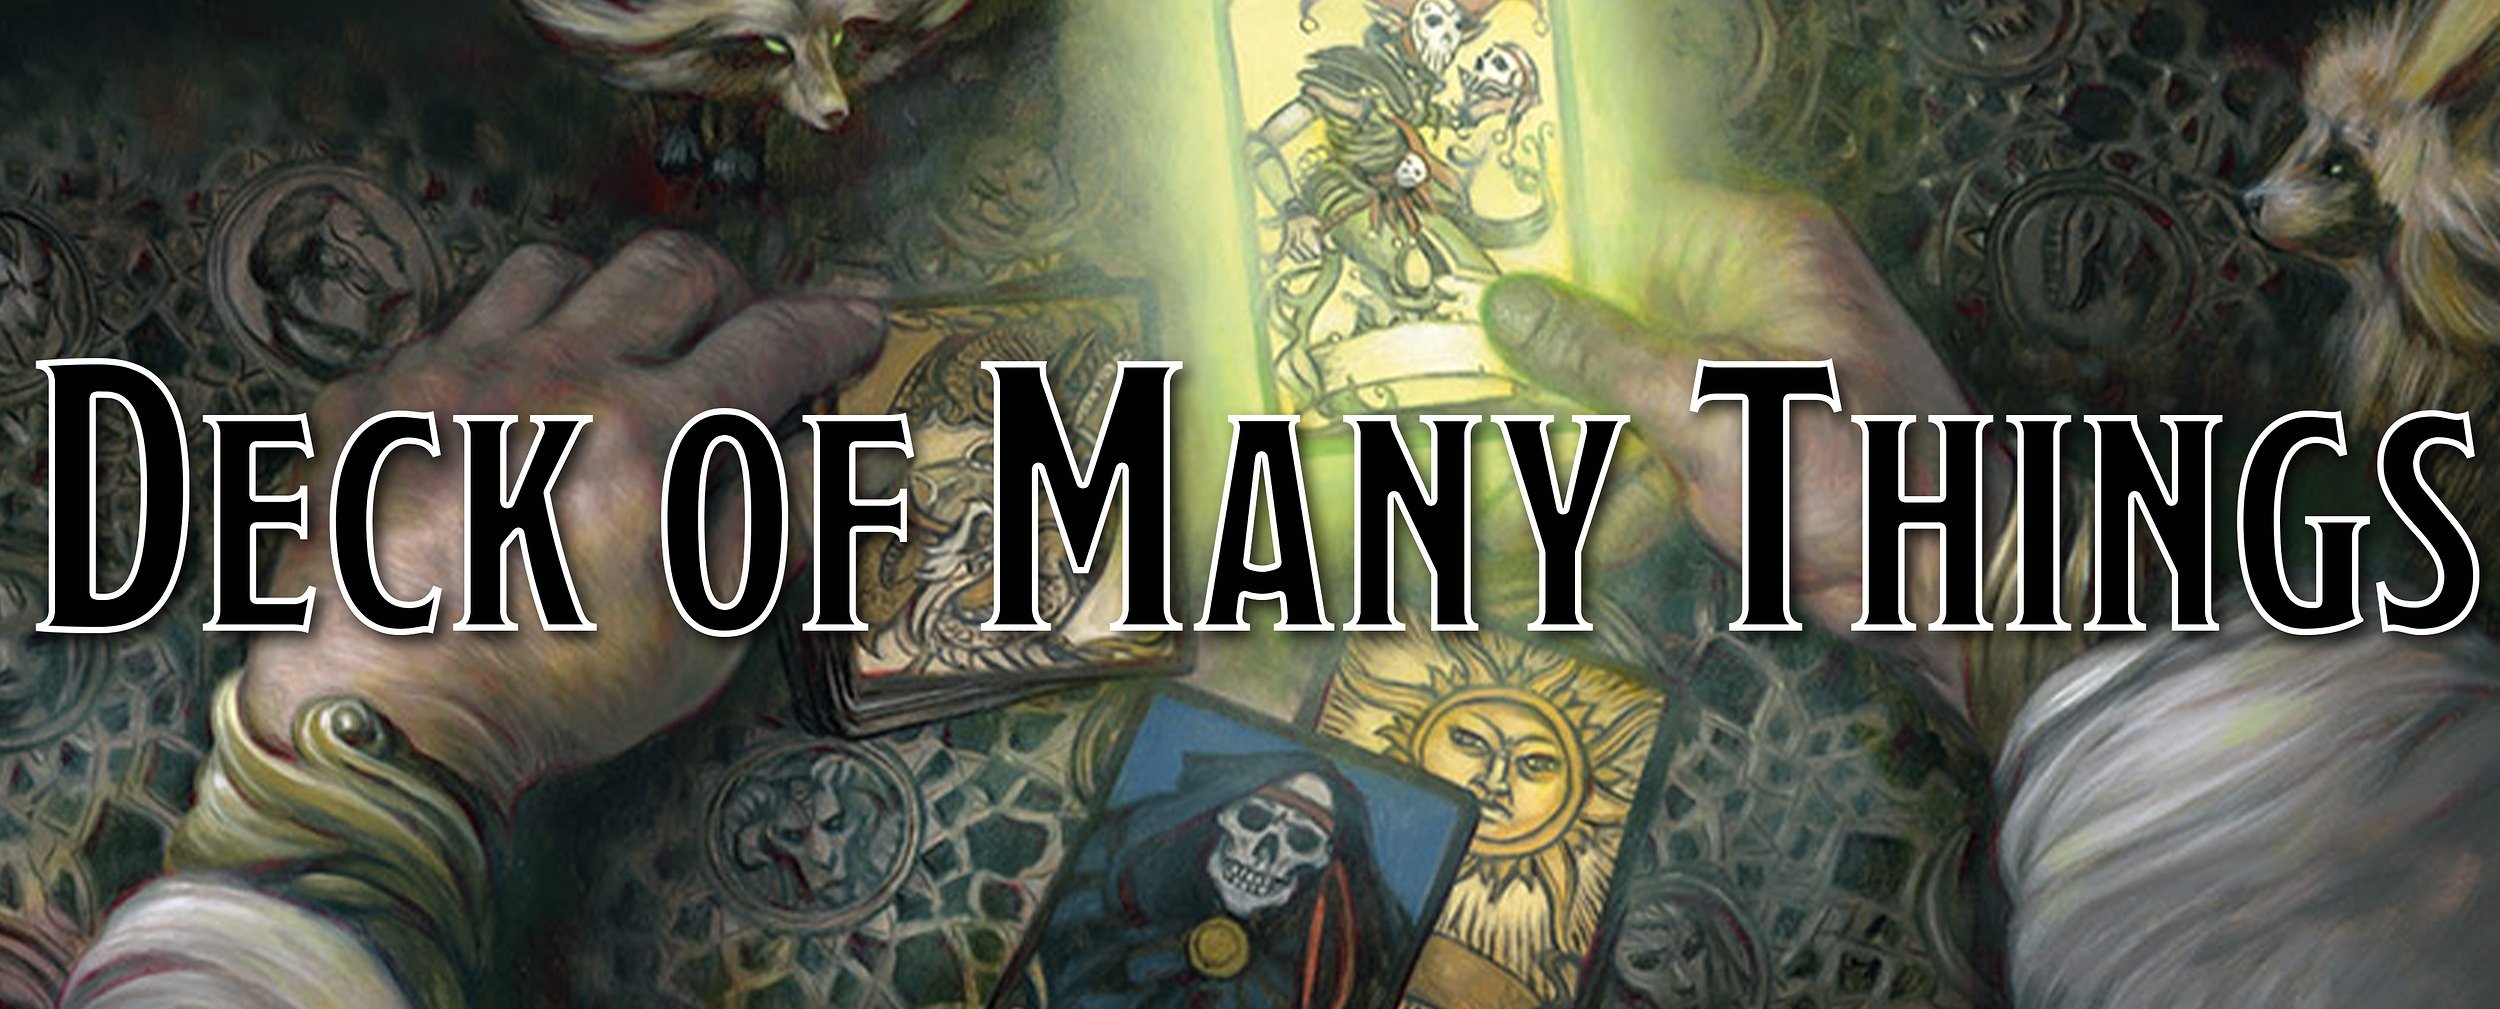 D&D 5E: THE DECK OF MANY THINGS